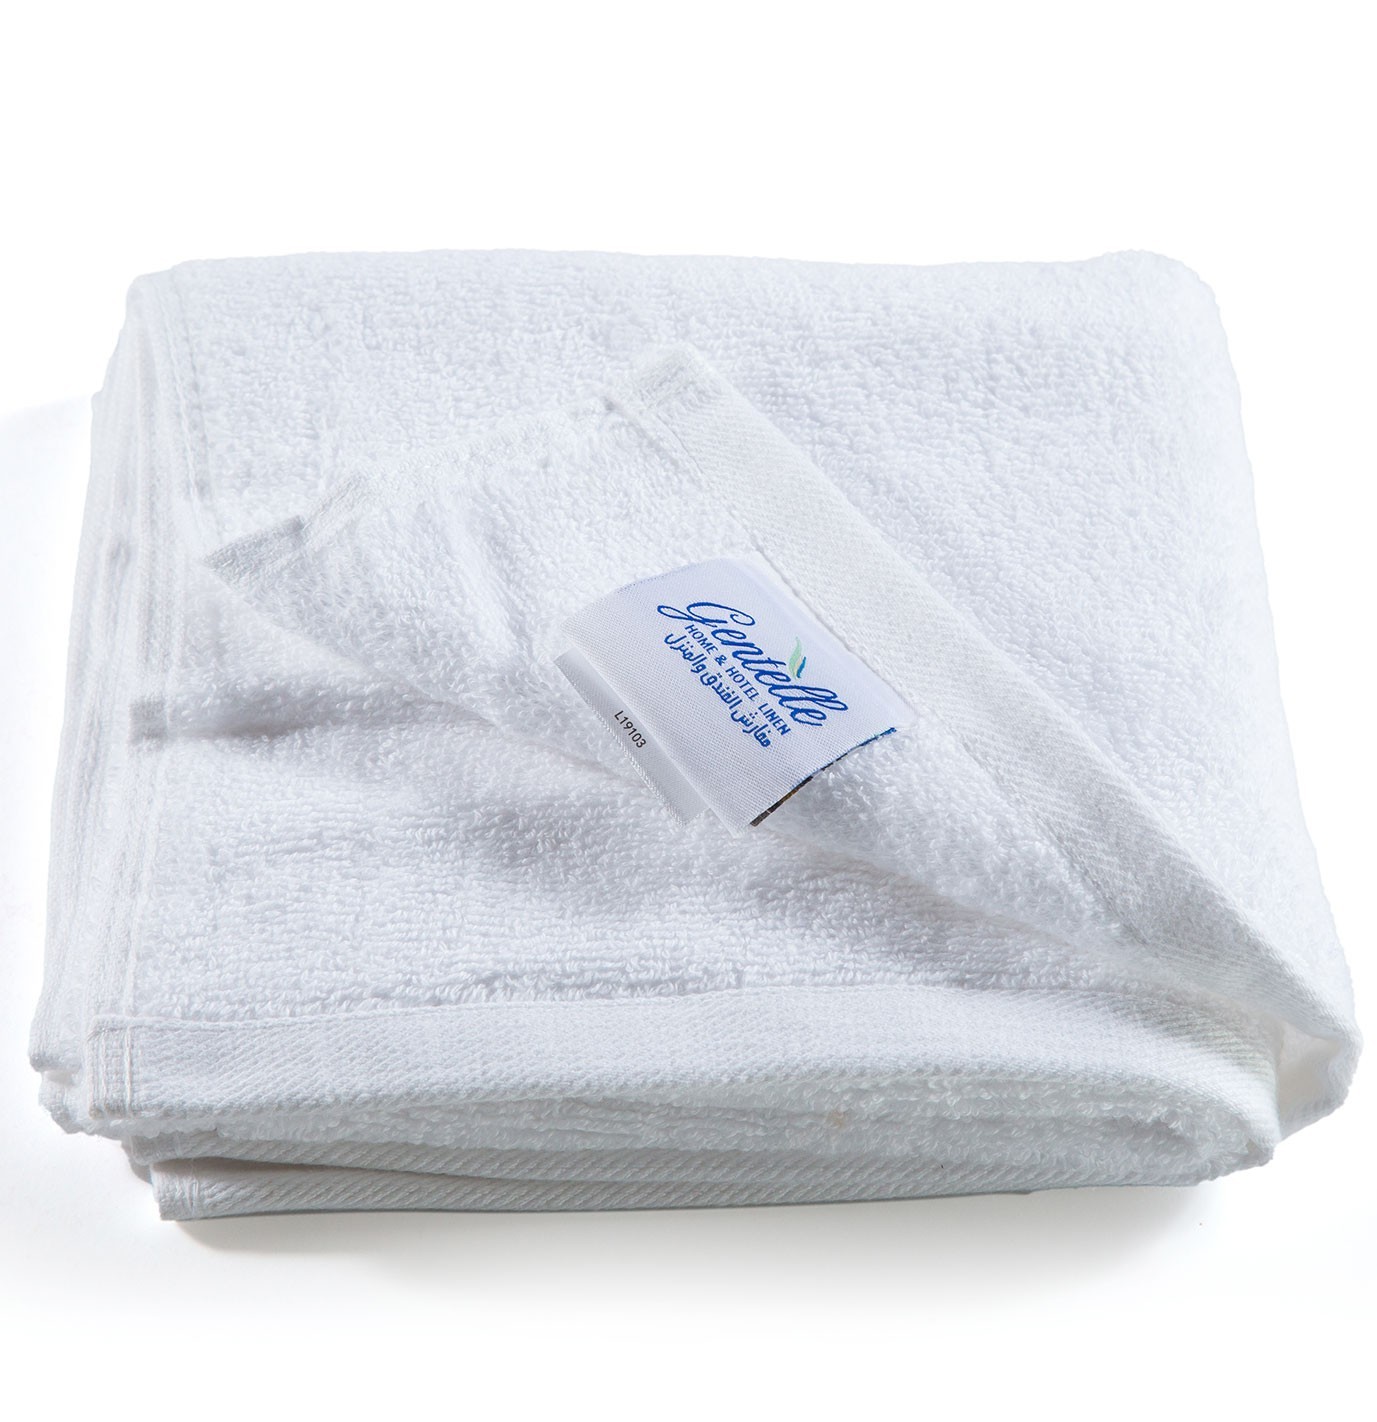 Hand Towel - White DELUXE 40x70cm - 625 GSM, 100% Cotton